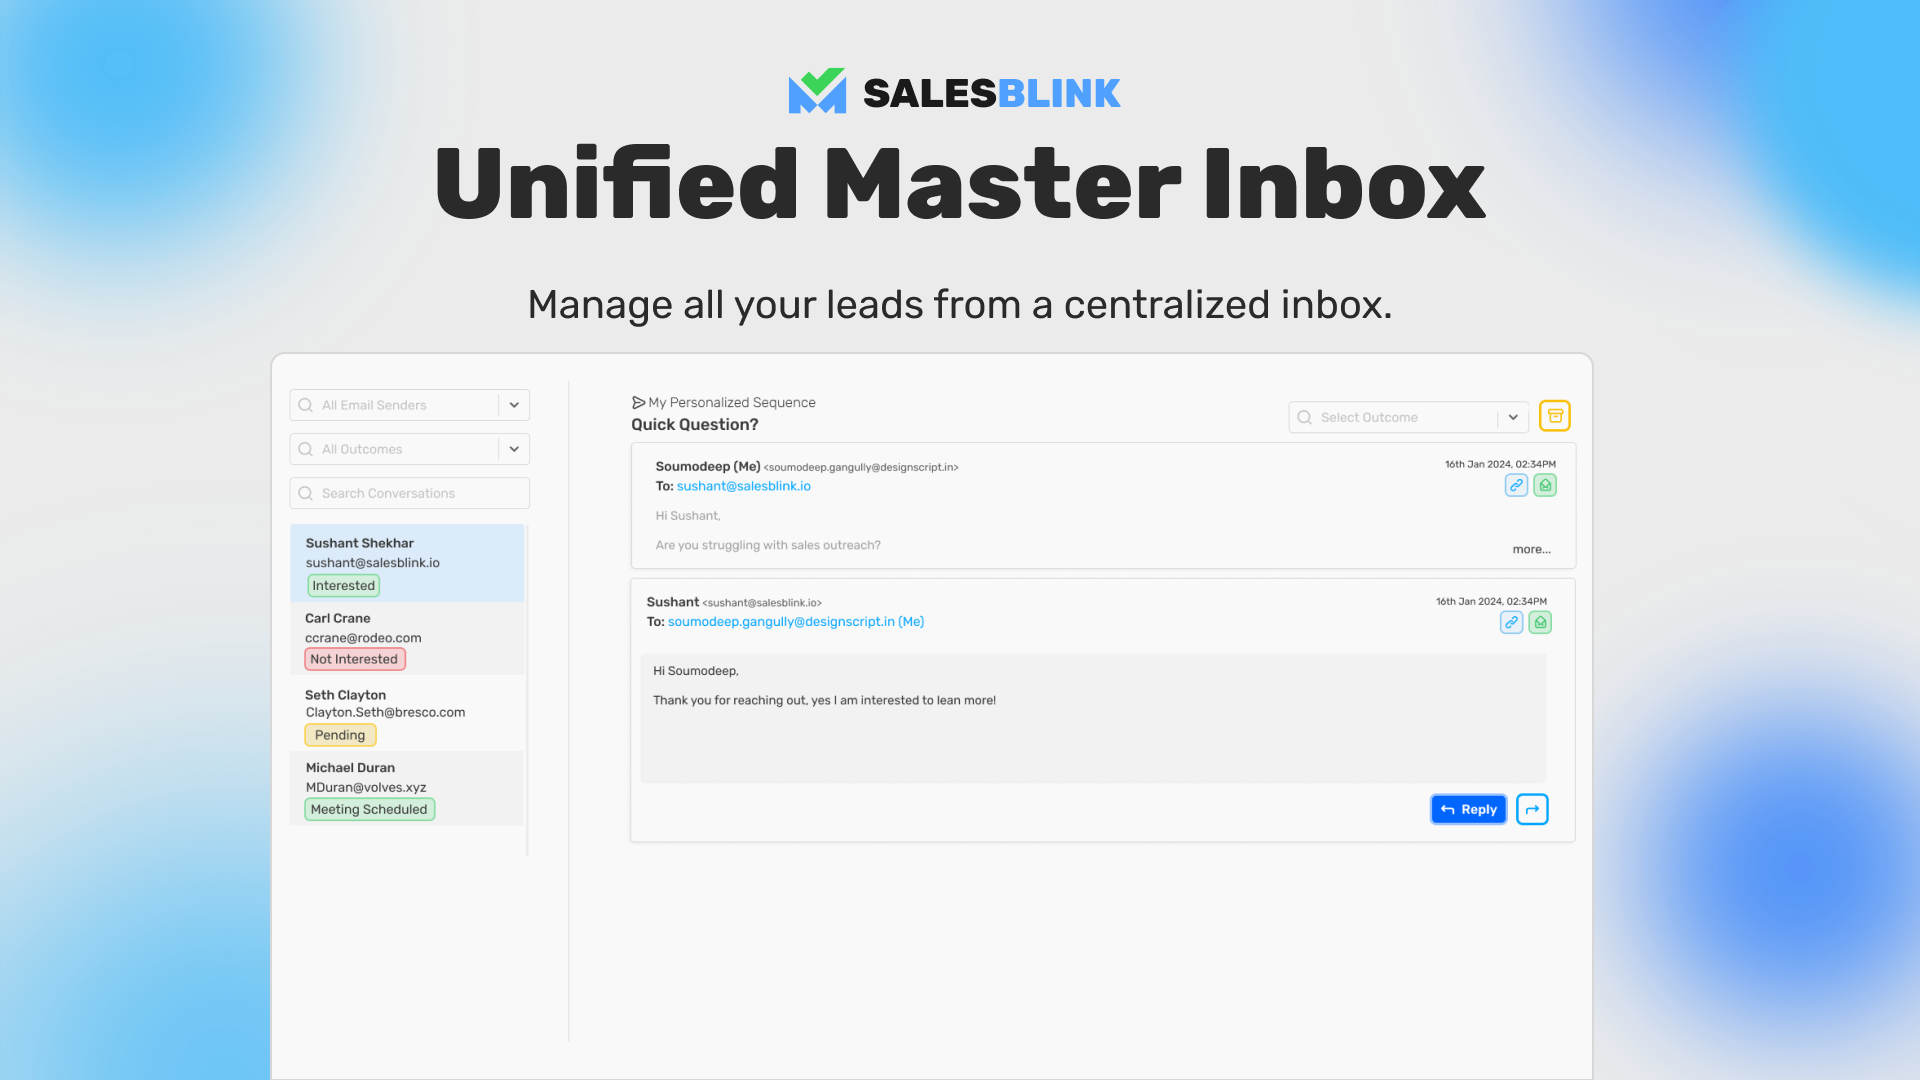 Manage all the leads from a Centralized Inbox